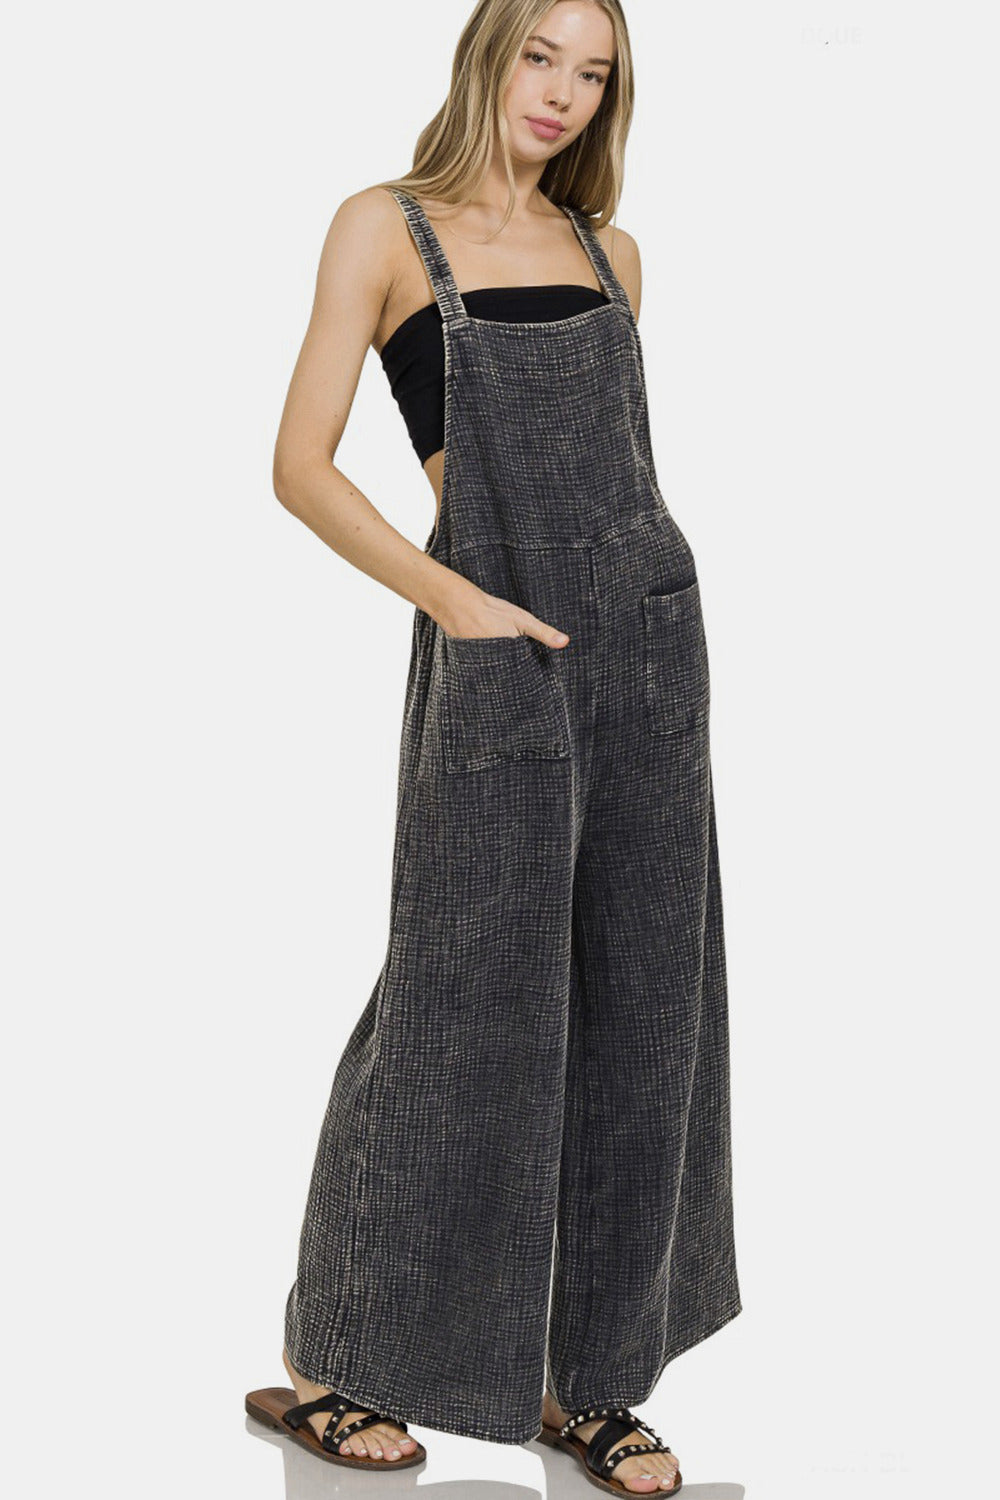 Cotton Mineral Washed Double Gauze Wide Leg Overalls